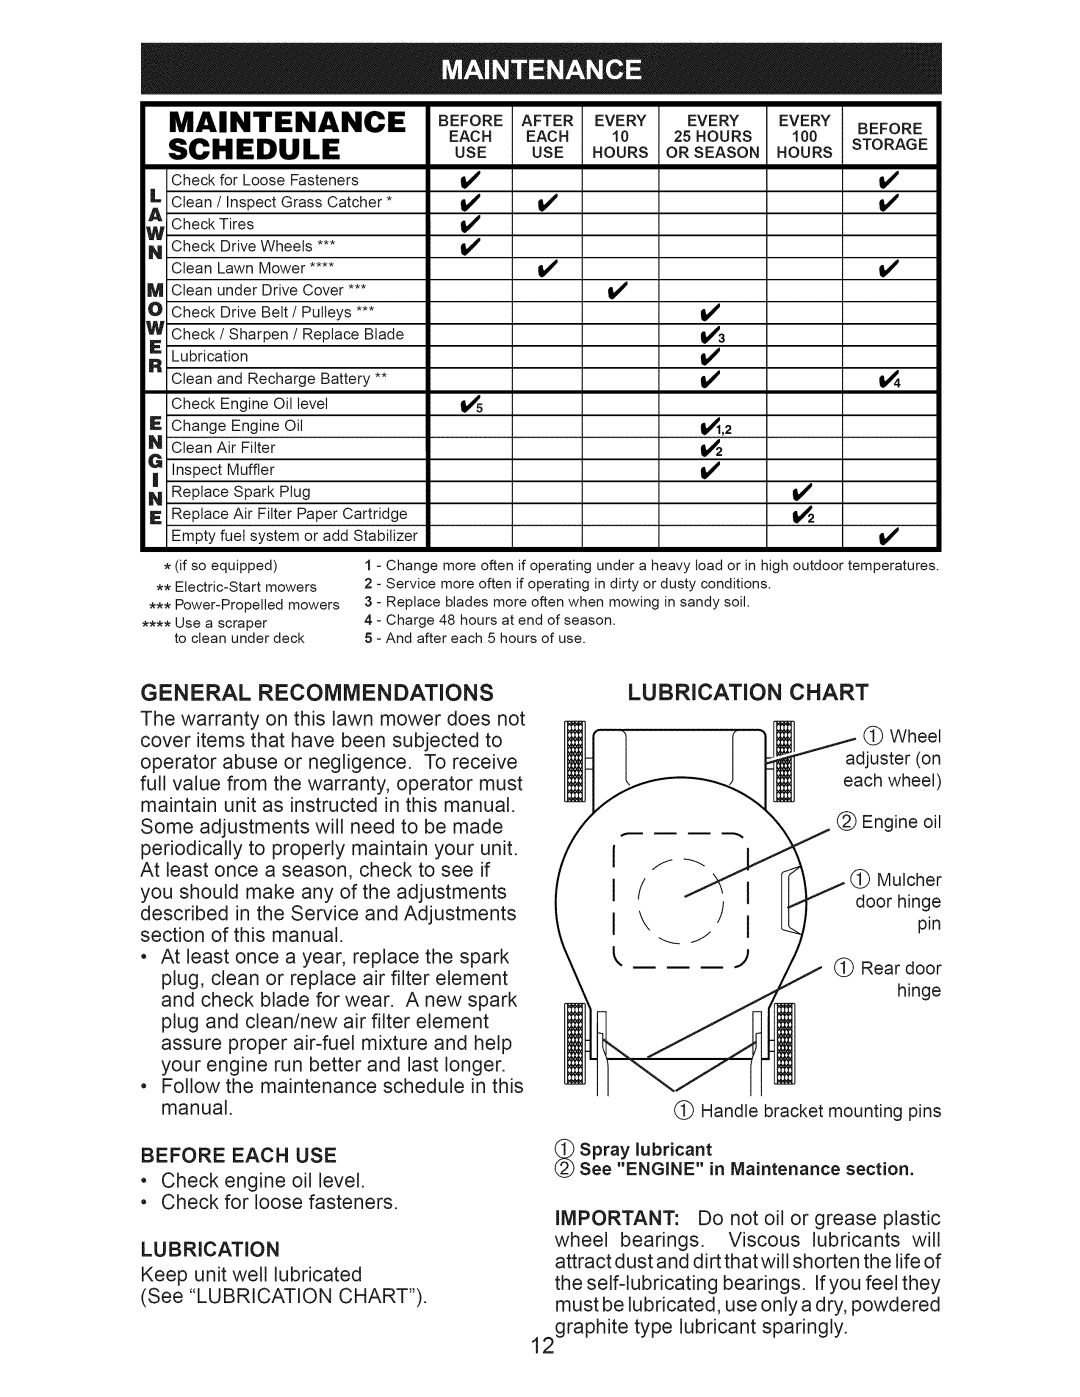 Craftsman 917.374354 owner manual Maintenance, Schedule, Use Hours 